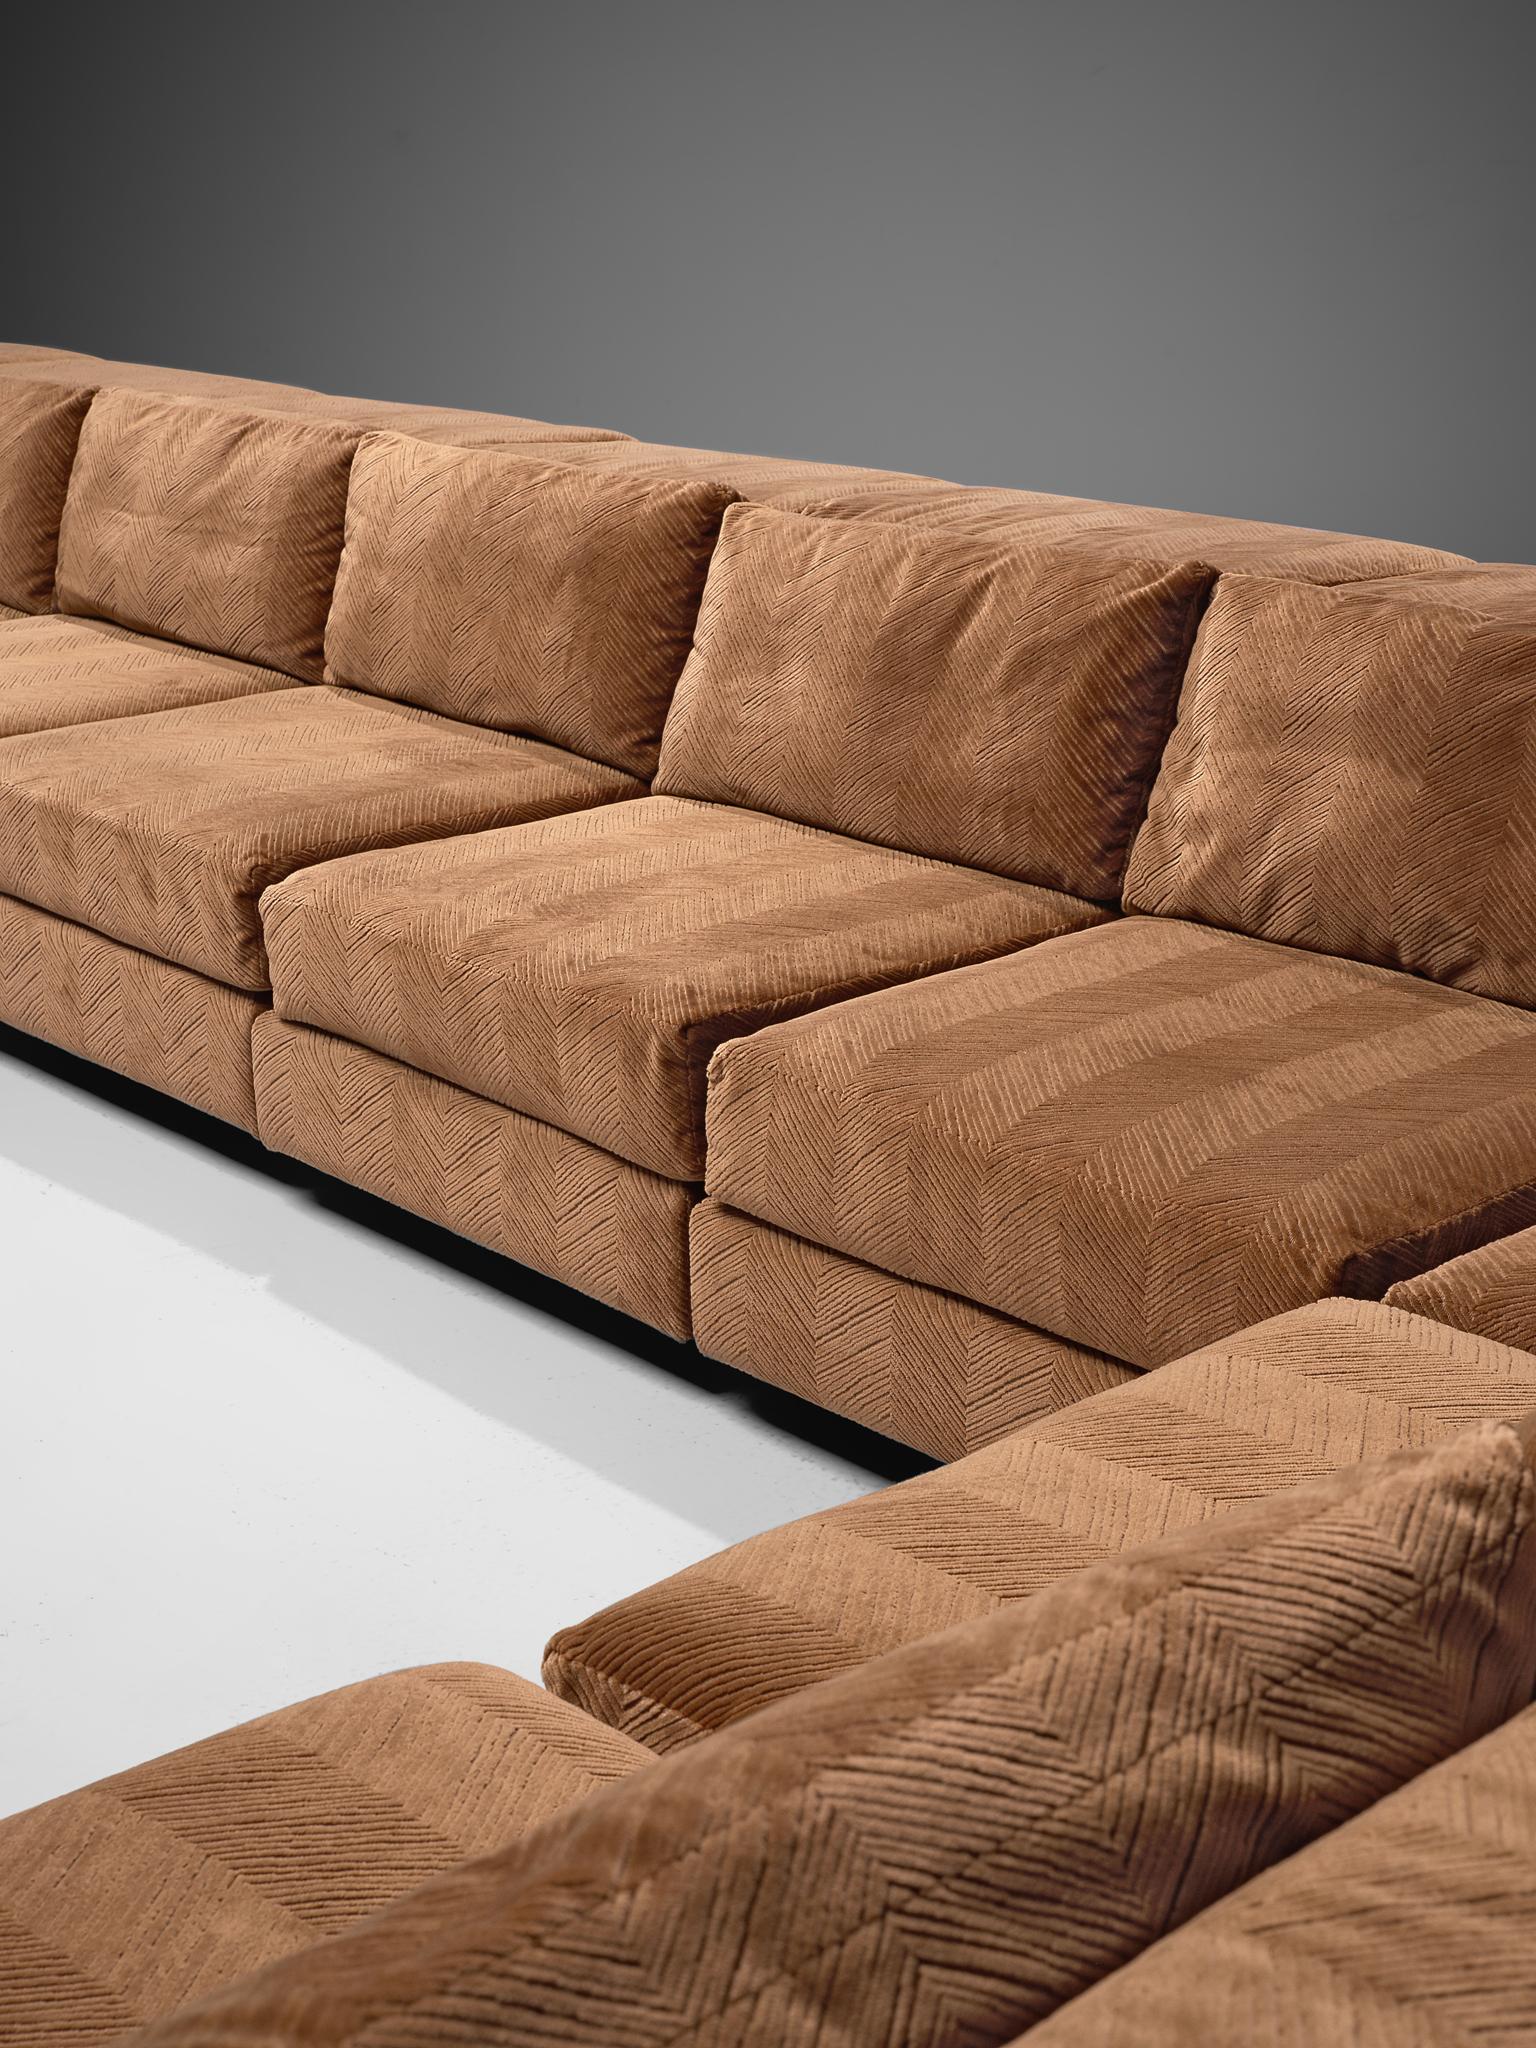 Large Sectional Sofa in Camel Colored Fabric, 1970s 1